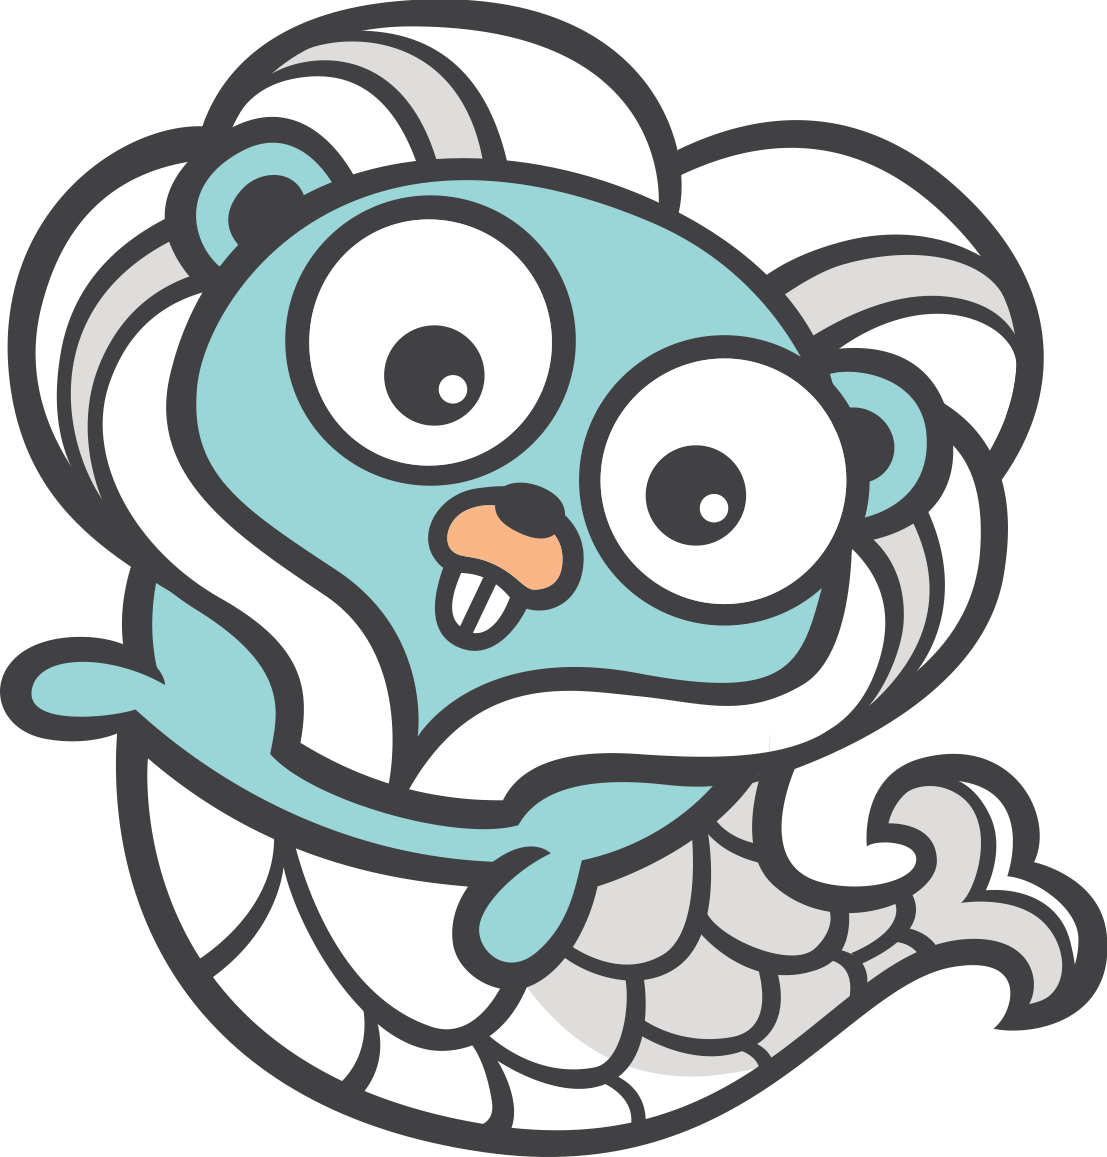 Unit Testing in Golang: Basic intro (What, Why) @ GoSG Meetup